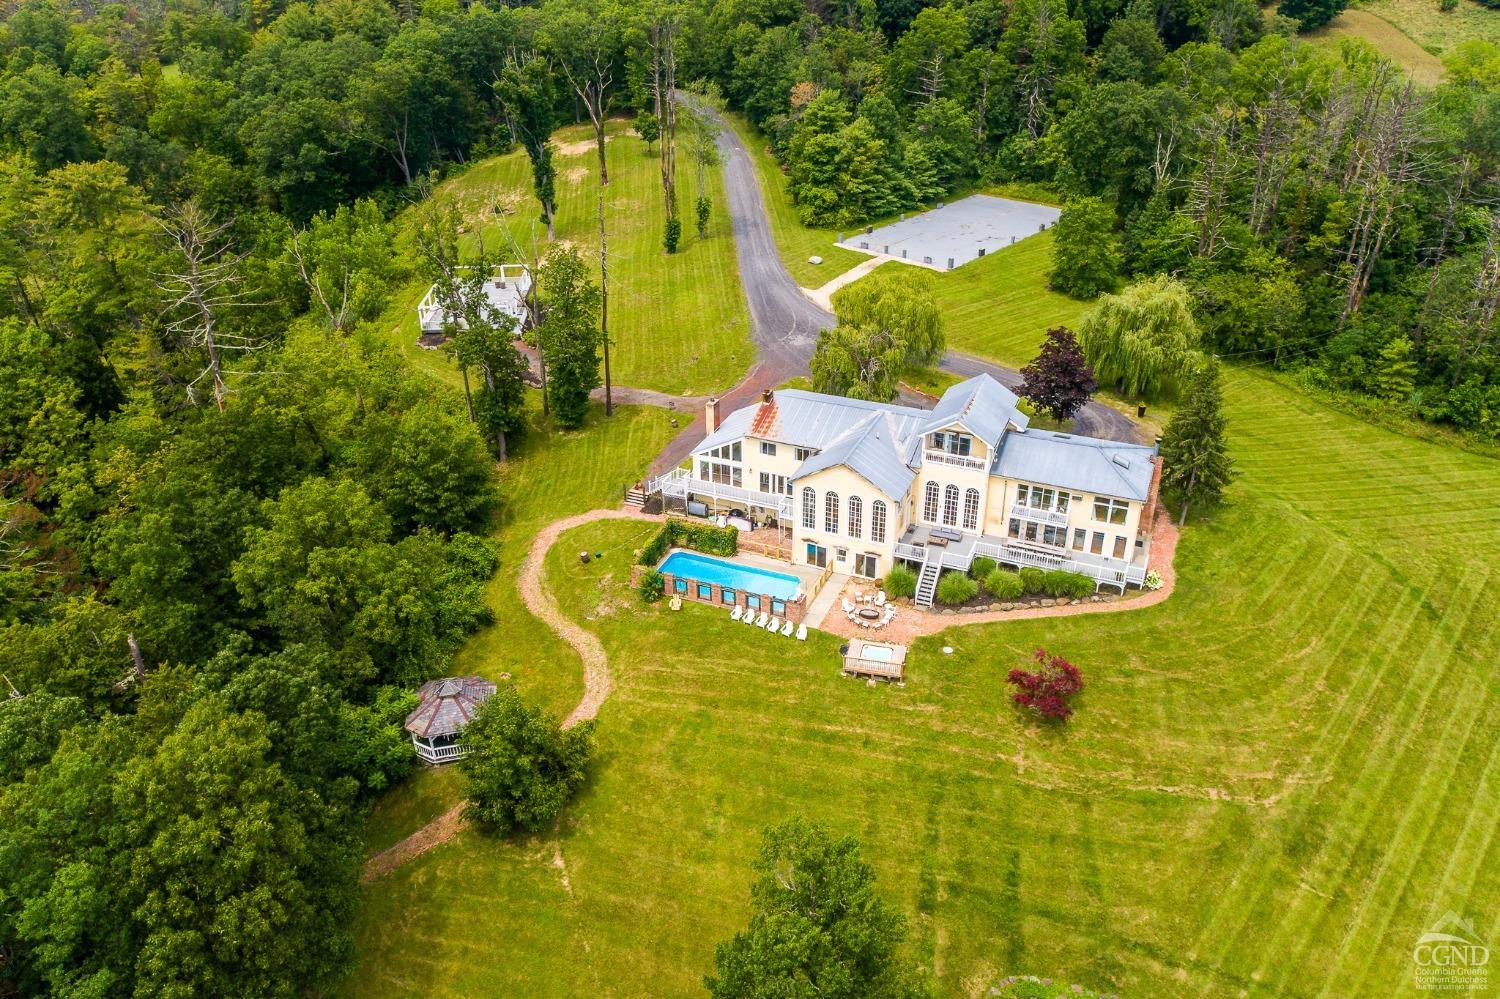 Property for Sale at 216 Route 385, Athens, New York - Bedrooms: 11 
Bathrooms: 7 
Rooms: 15  - $4,950,000